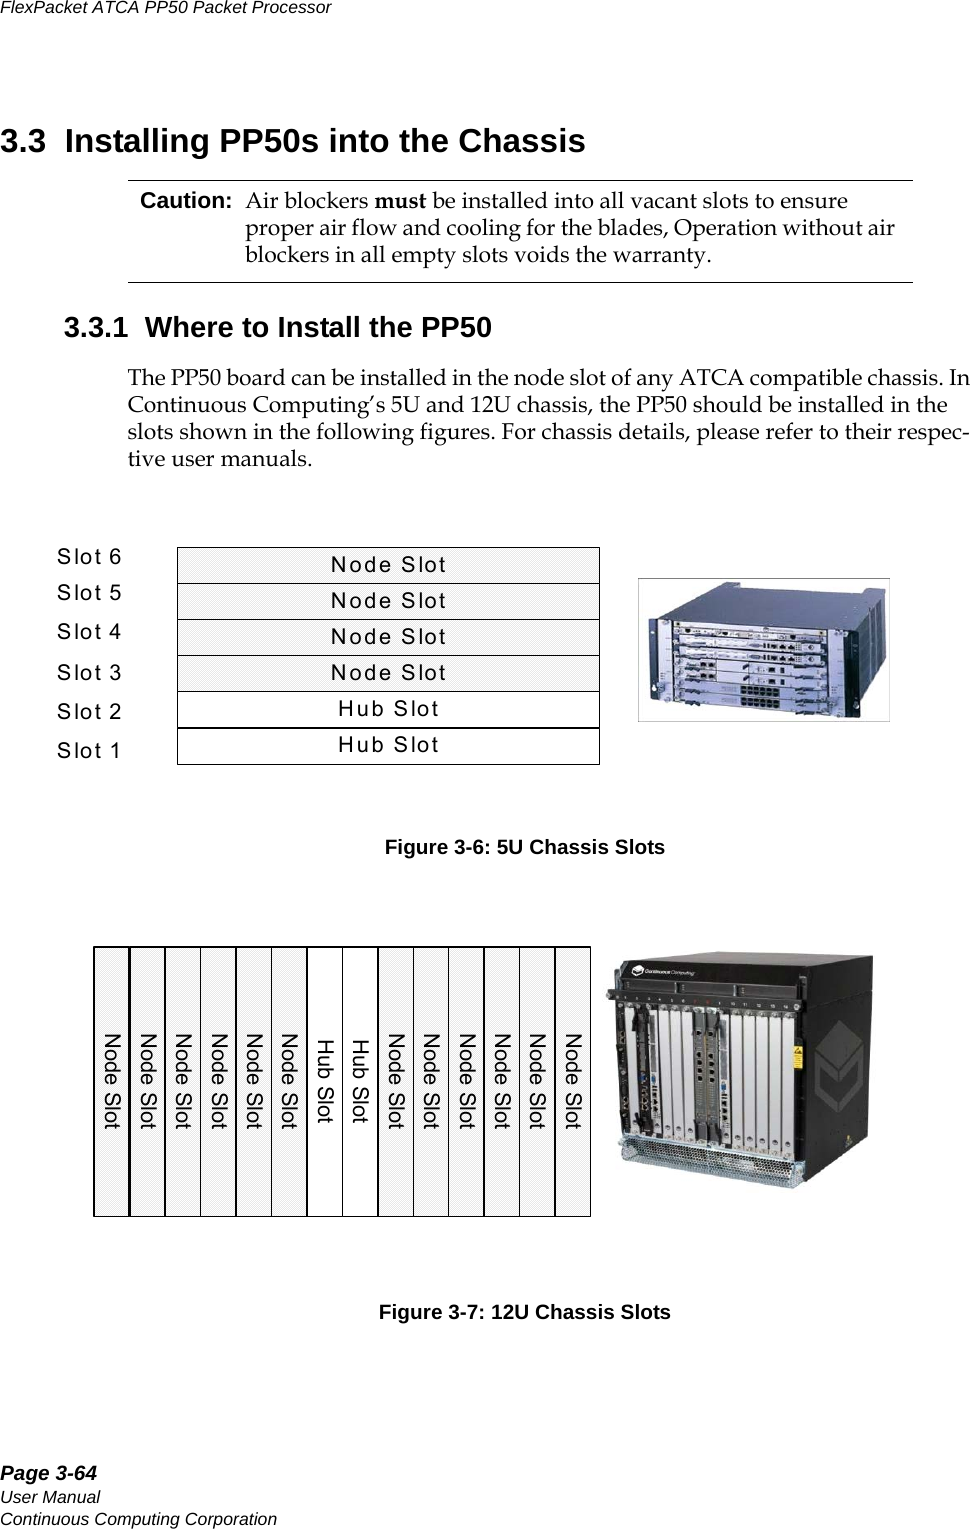 Page 3-64User ManualContinuous Computing CorporationFlexPacket ATCA PP50 Packet Processor     Preliminary3.3  Installing PP50s into the Chassis3.3.1  Where to Install the PP50The PP50 board can be installed in the node slot of any ATCA compatible chassis. In Continuous Computing’s 5U and 12U chassis, the PP50 should be installed in the slots shown in the following figures. For chassis details, please refer to their respec-tive user manuals. Figure 3-6: 5U Chassis SlotsFigure 3-7: 12U Chassis SlotsCaution: Air blockers must be installed into all vacant slots to ensure proper air flow and cooling for the blades, Operation without air blockers in all empty slots voids the warranty.Node SlotHub SlotNode SlotNode SlotNode SlotHub SlotSlot 1Slot 2Slot 3Slot 4Slot 5Slot 6Node SlotNode SlotNode SlotNode SlotHub SlotNode SlotNode SlotHub SlotNode SlotNode SlotNode SlotNode SlotNode SlotNode Slot